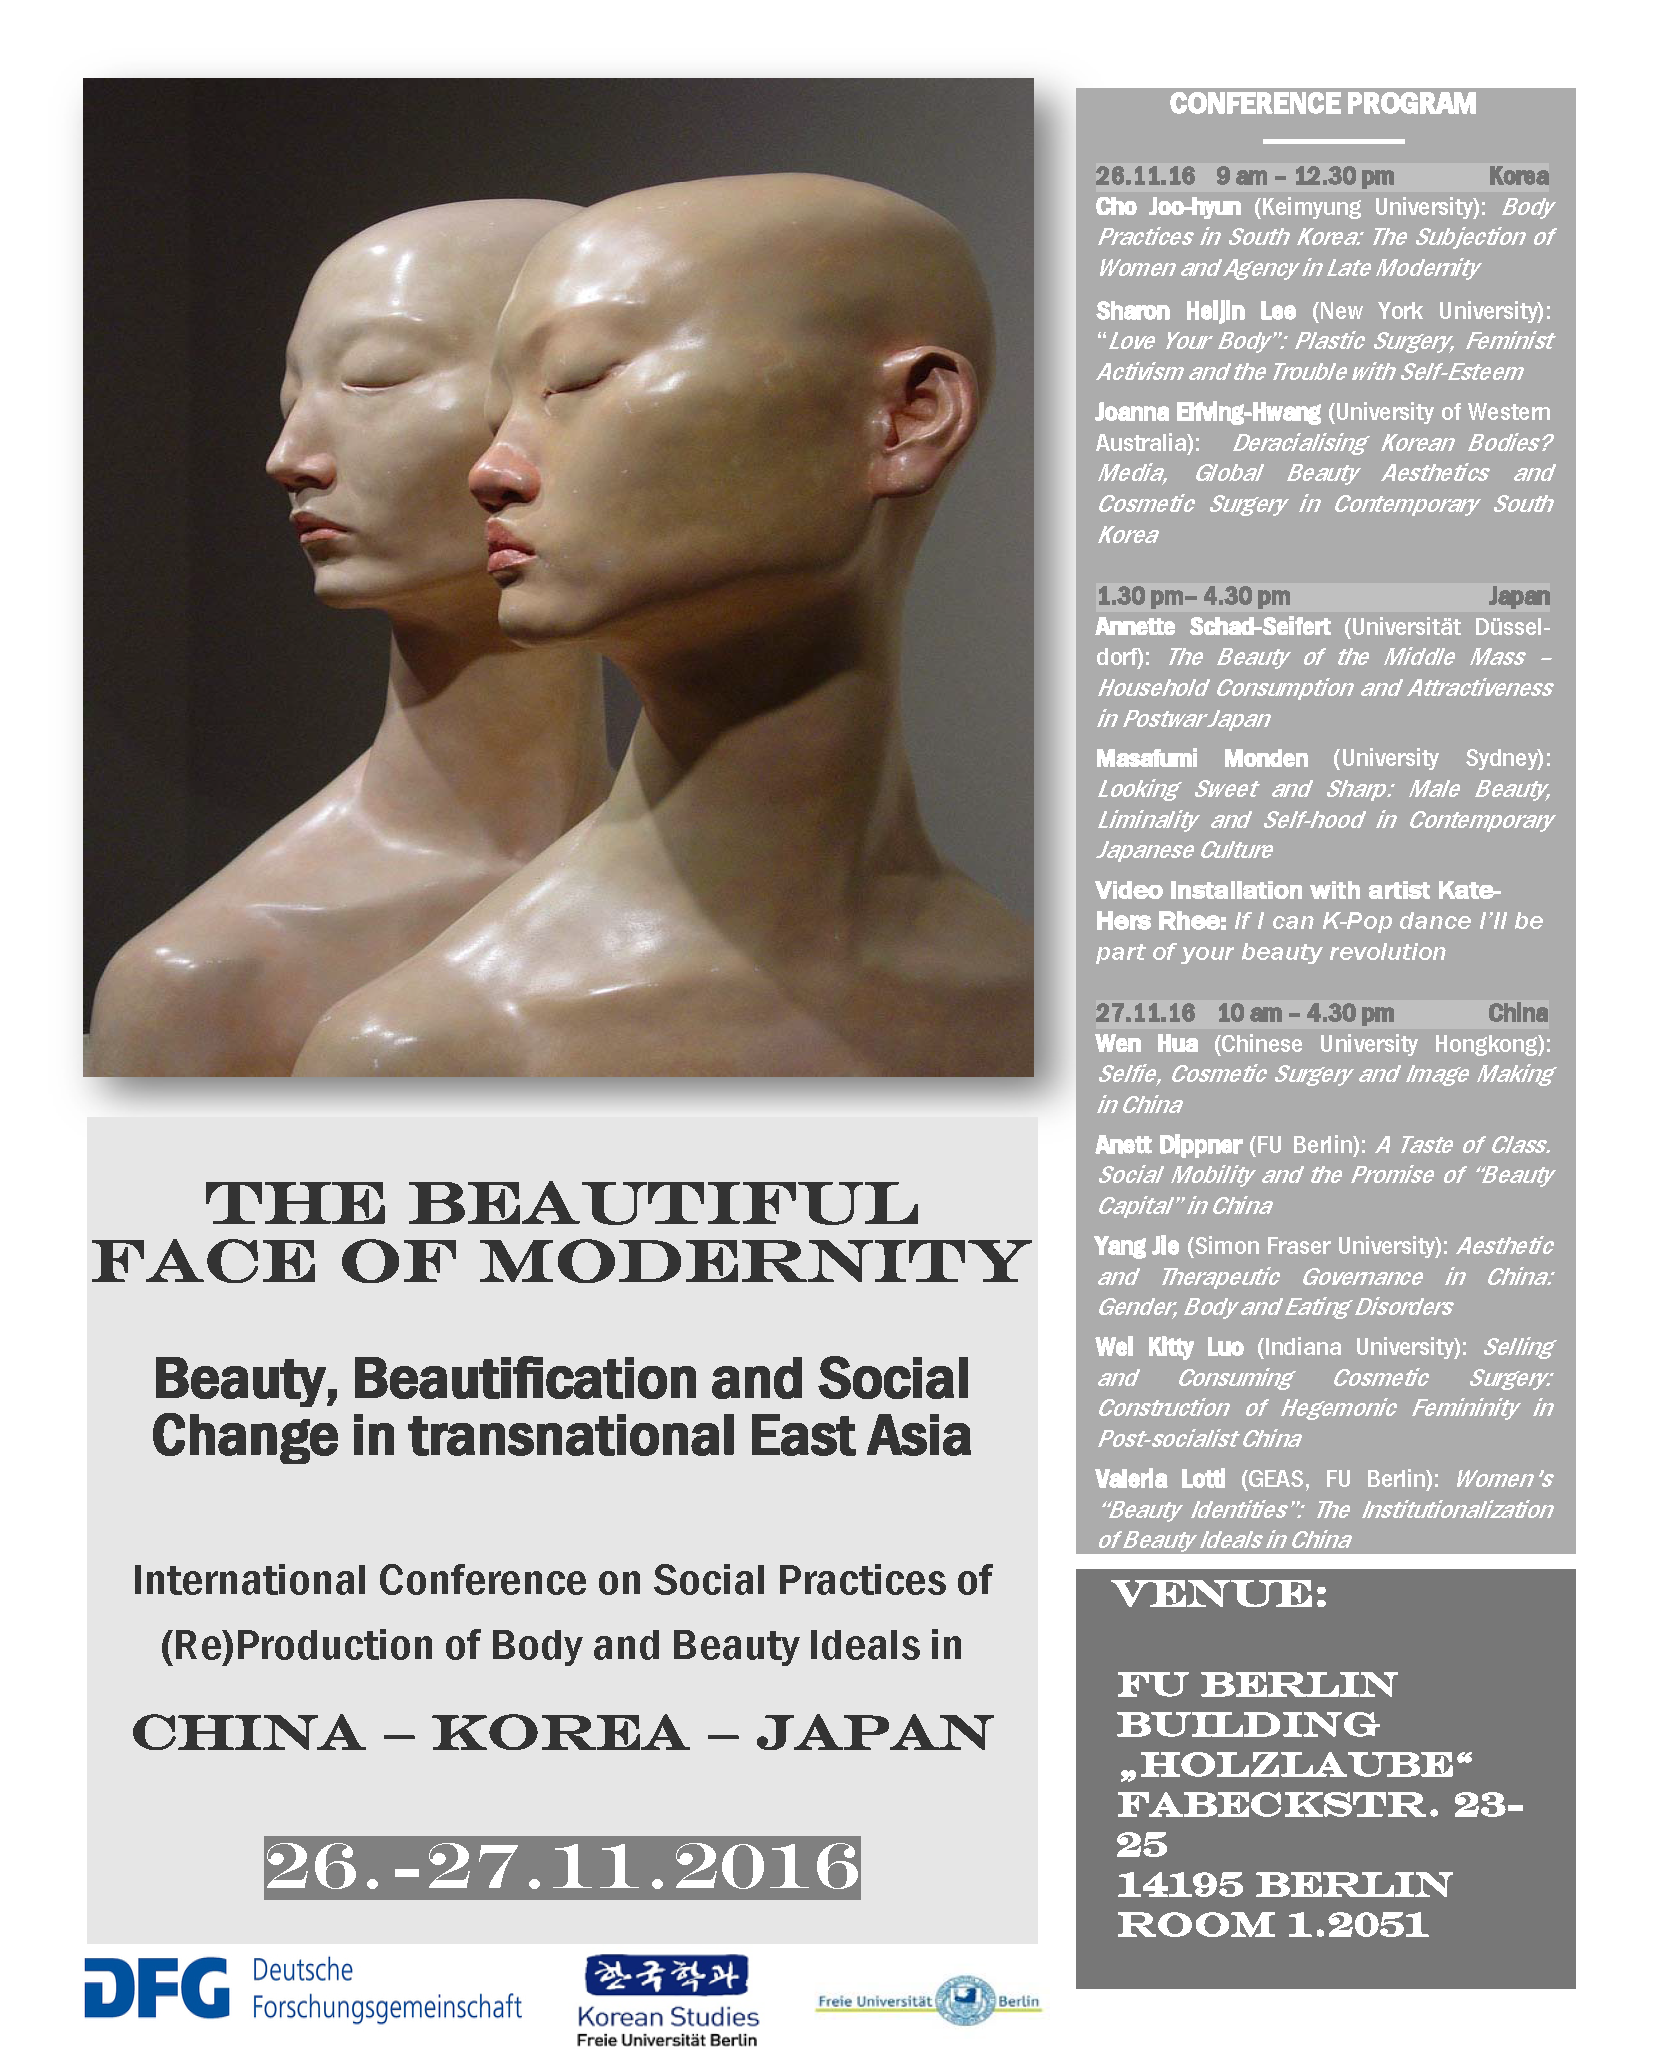 The beautiful face of modernity poster